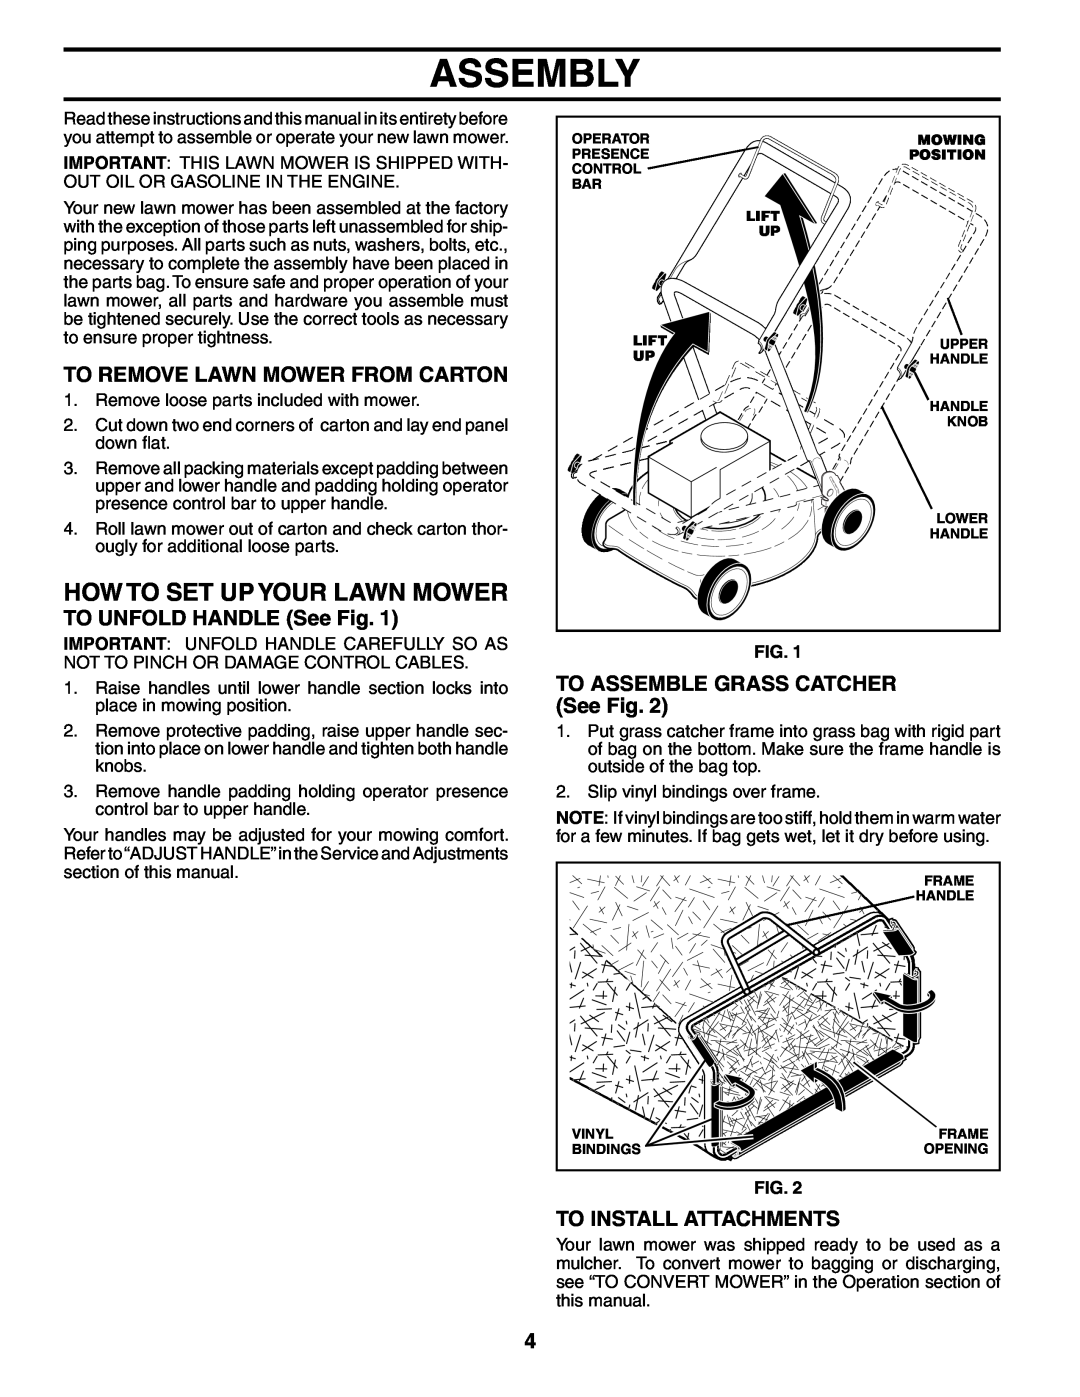 Husqvarna 6522SH Assembly, How To Set Up Your Lawn Mower, To Remove Lawn Mower From Carton, TO UNFOLD HANDLE See Fig 